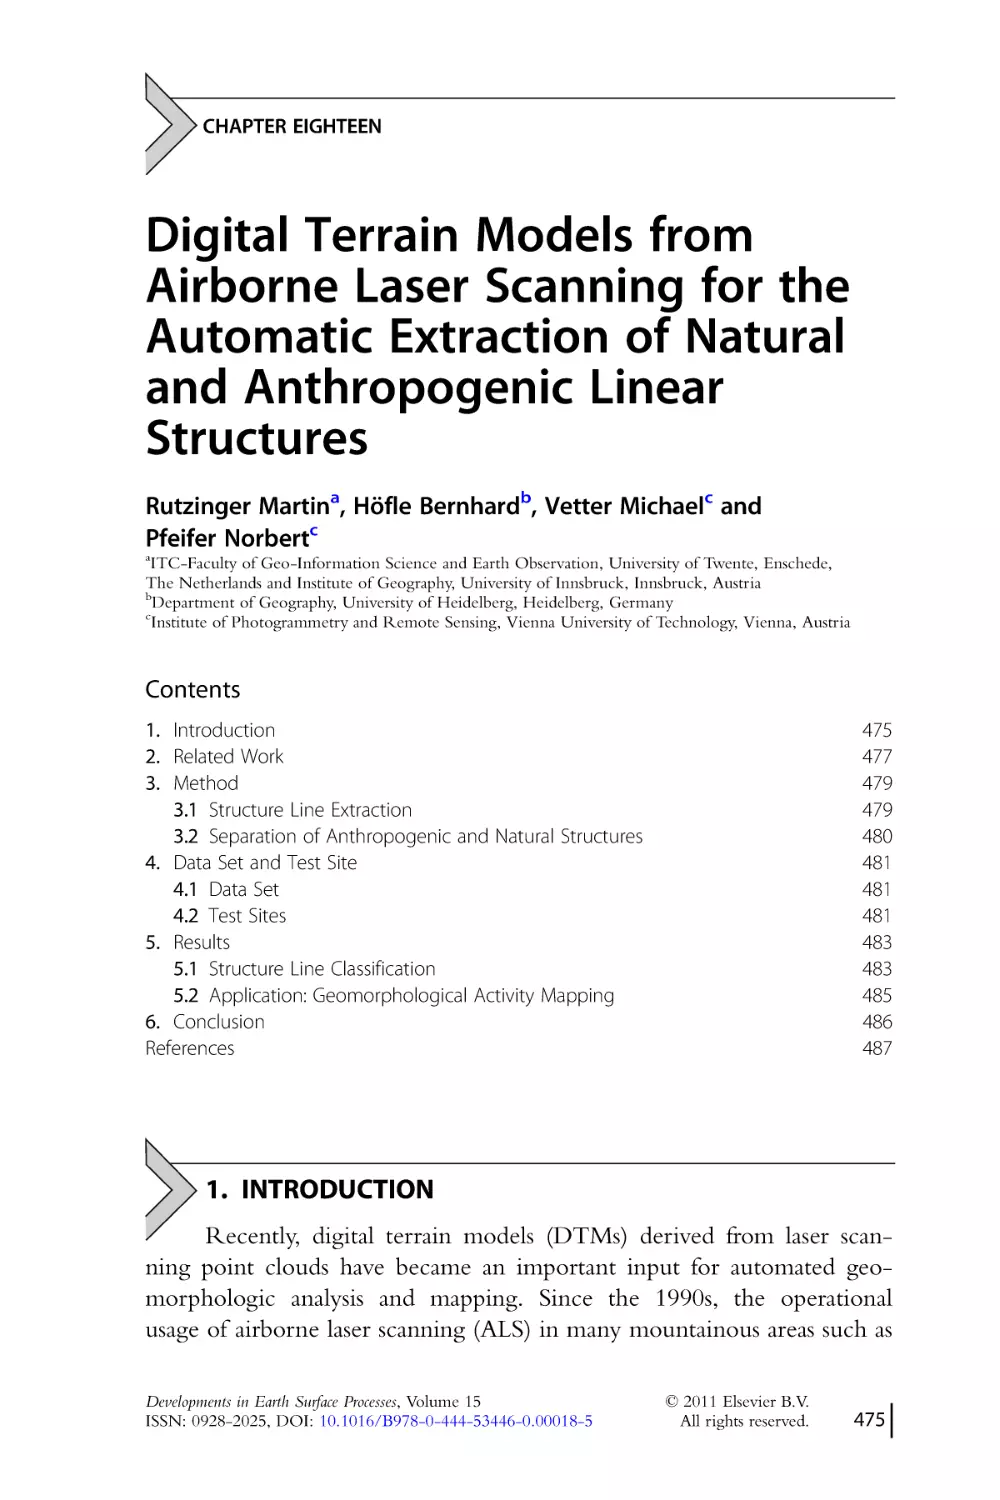 CHAPTER EIGHTEEN.
Digital Terrain Models from
Airborne Laser Scanning for the
Automatic Extraction of Natural
and Anthropogenic Linear
Structures
1. Introduction